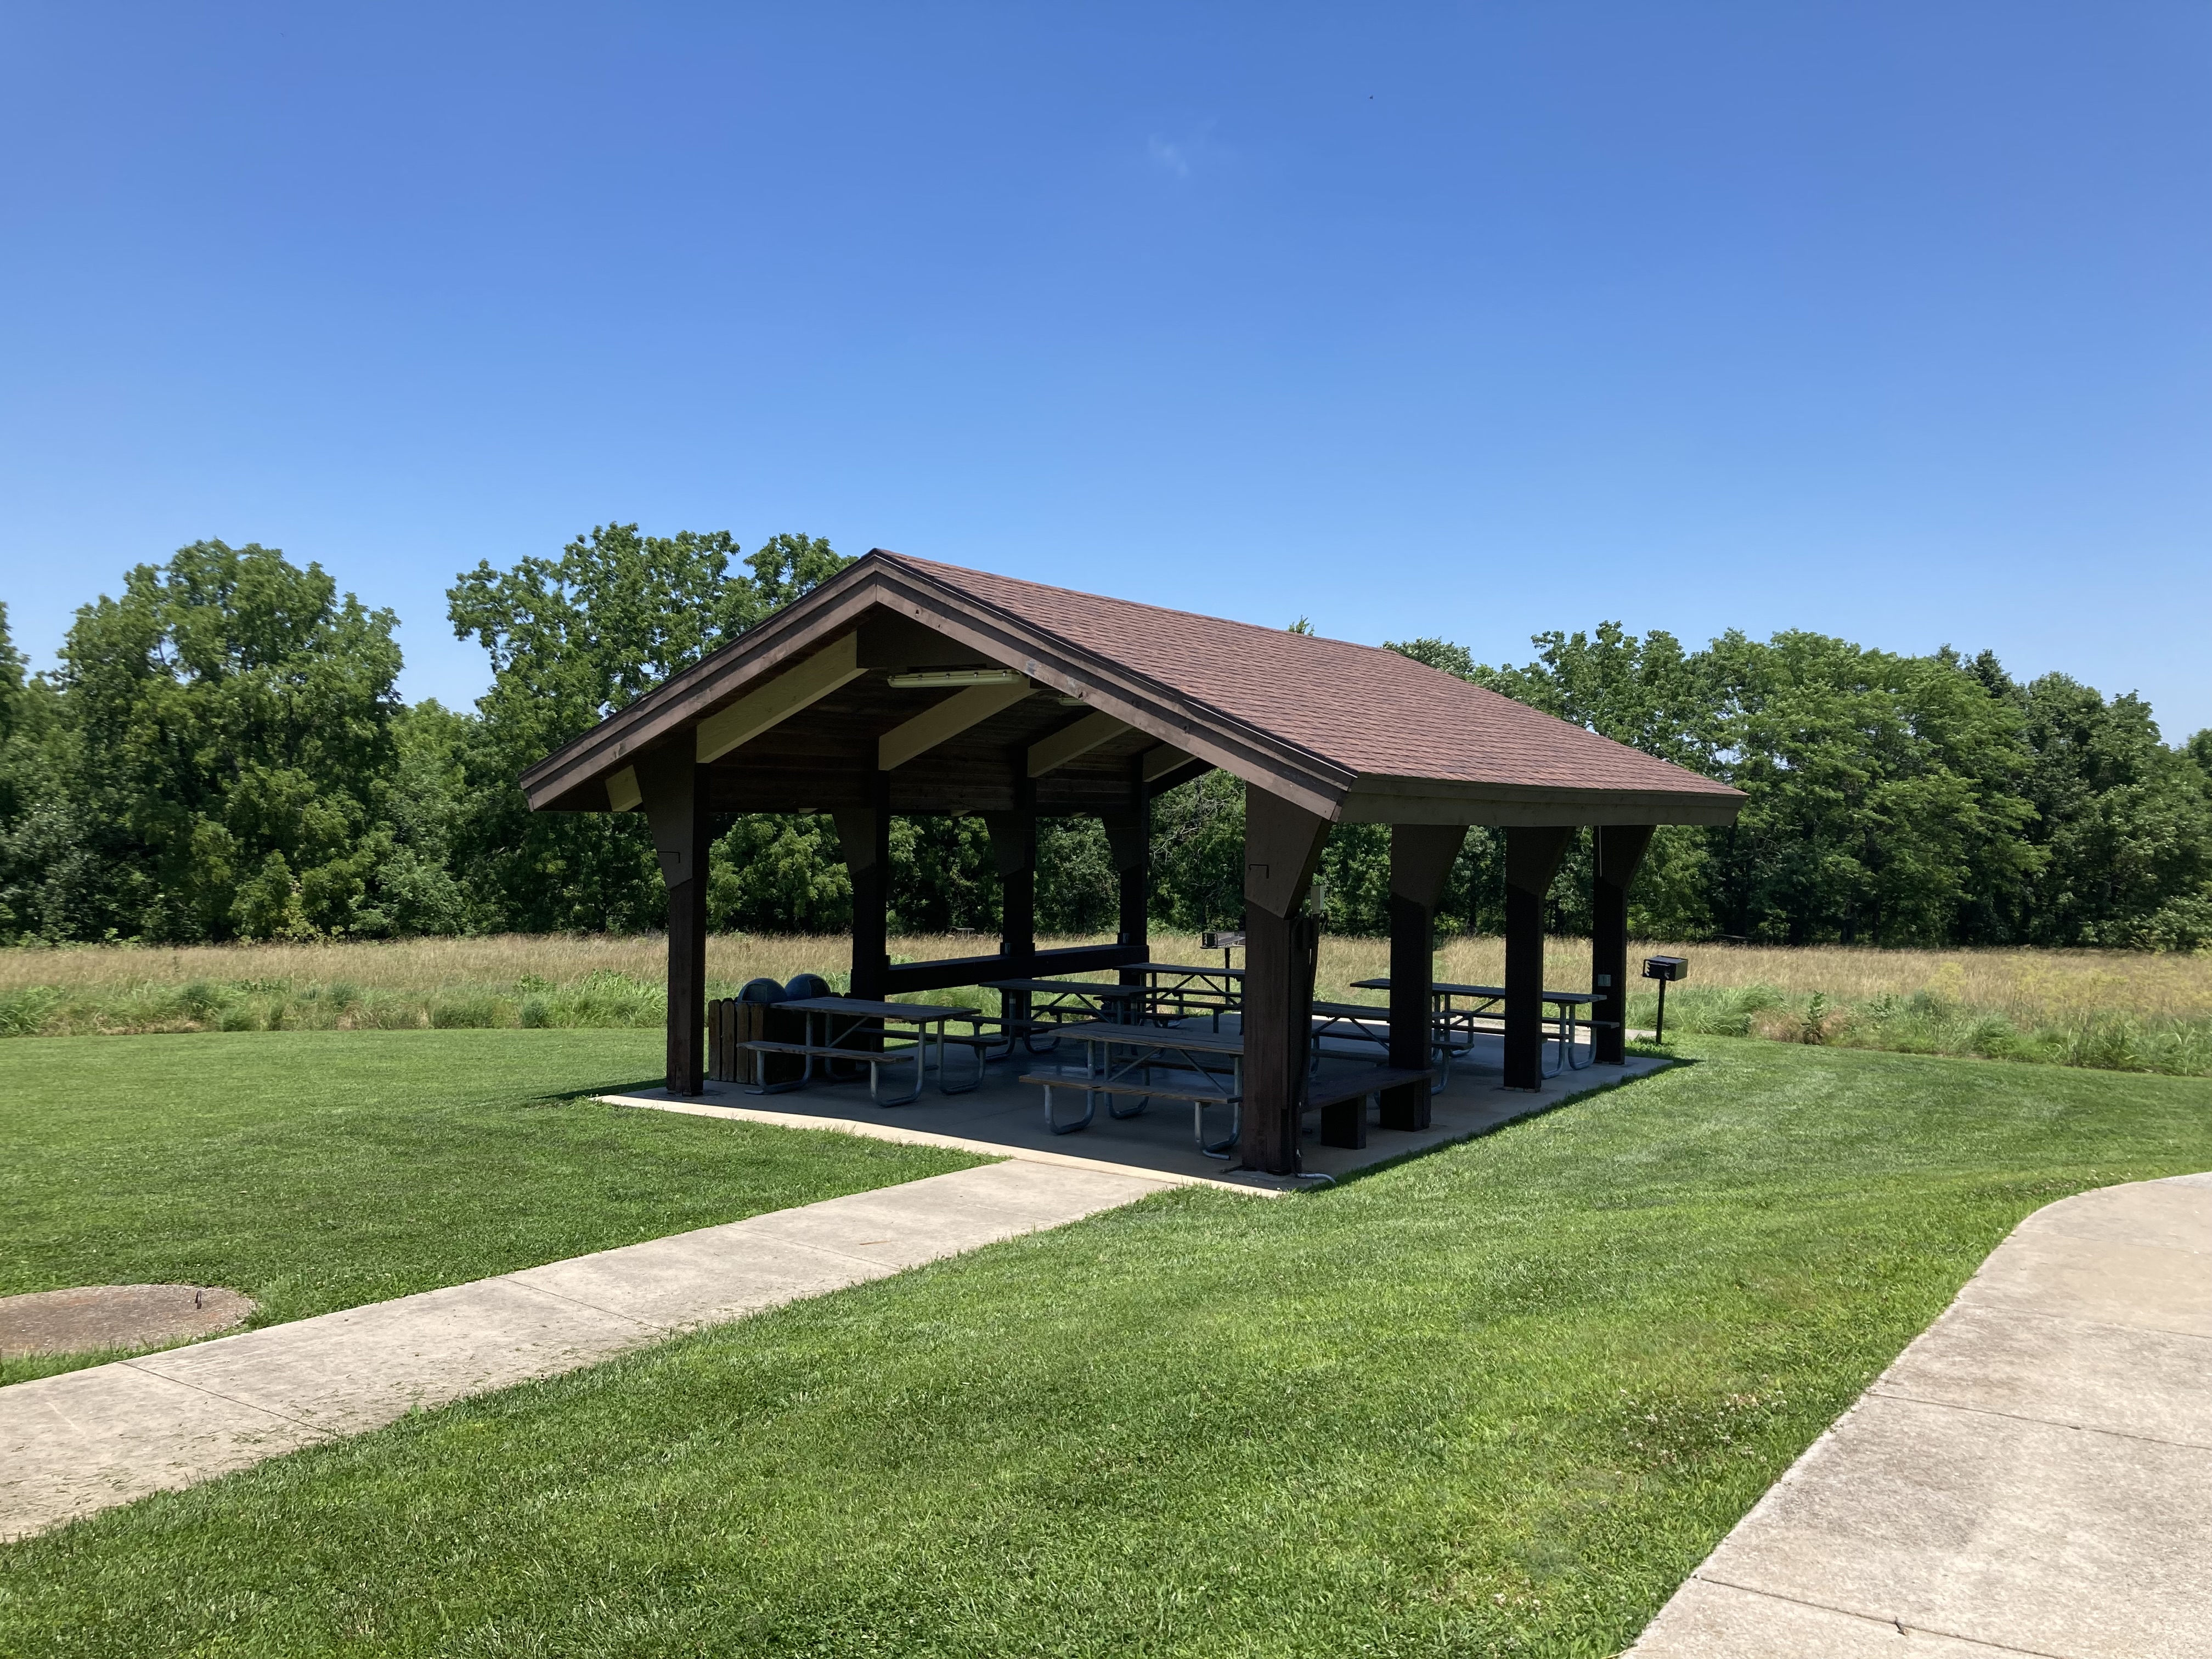 Open picnic shelter with roof and six picnic tables and a pedestal grill